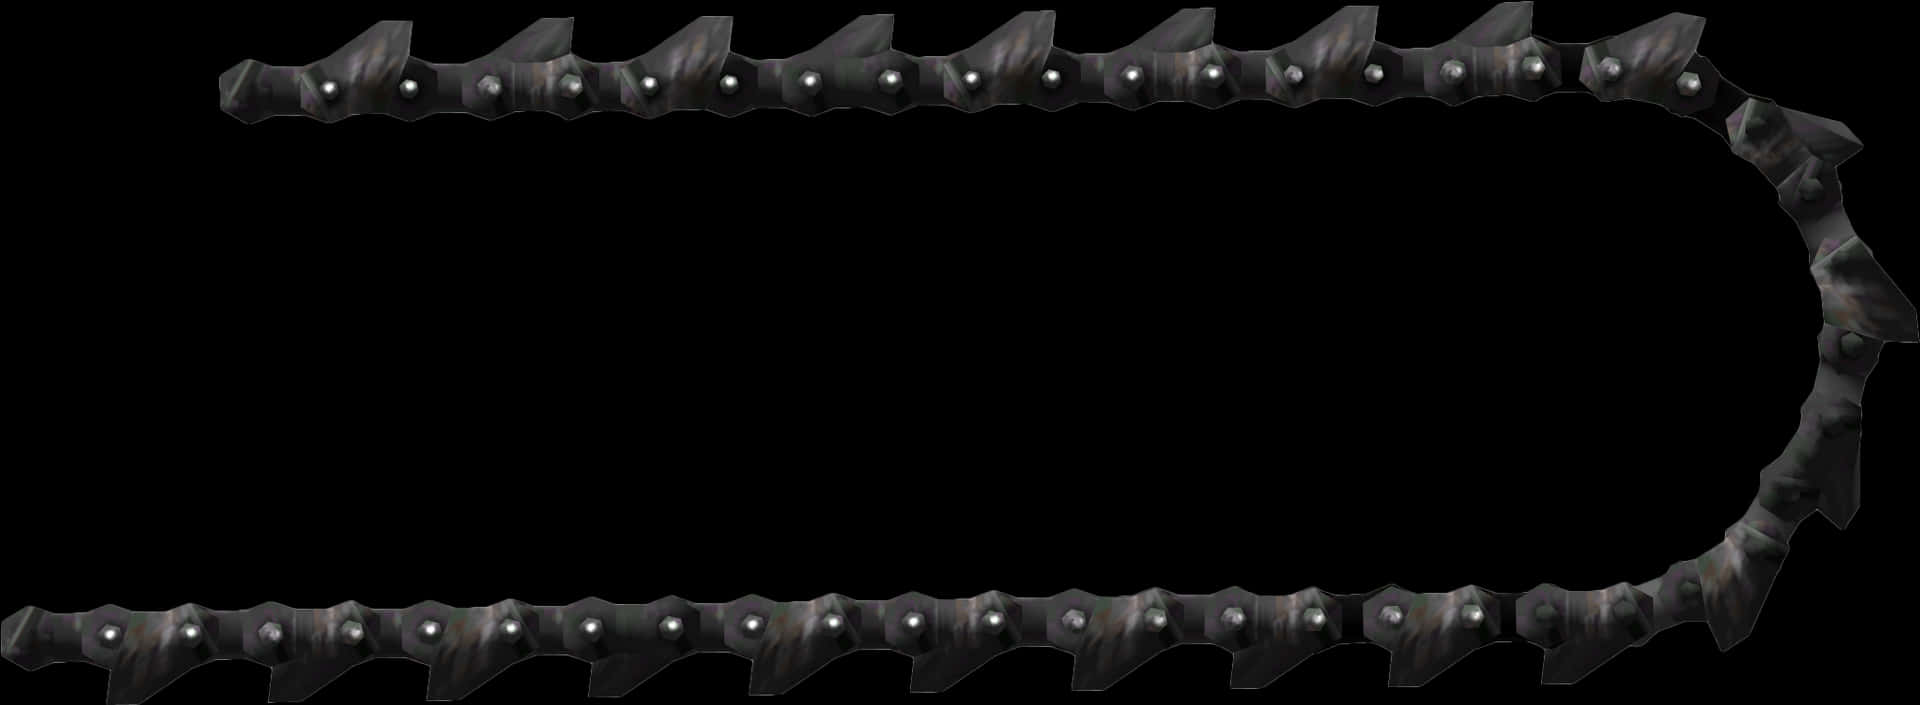 Metallic Spiked Chain Frame PNG